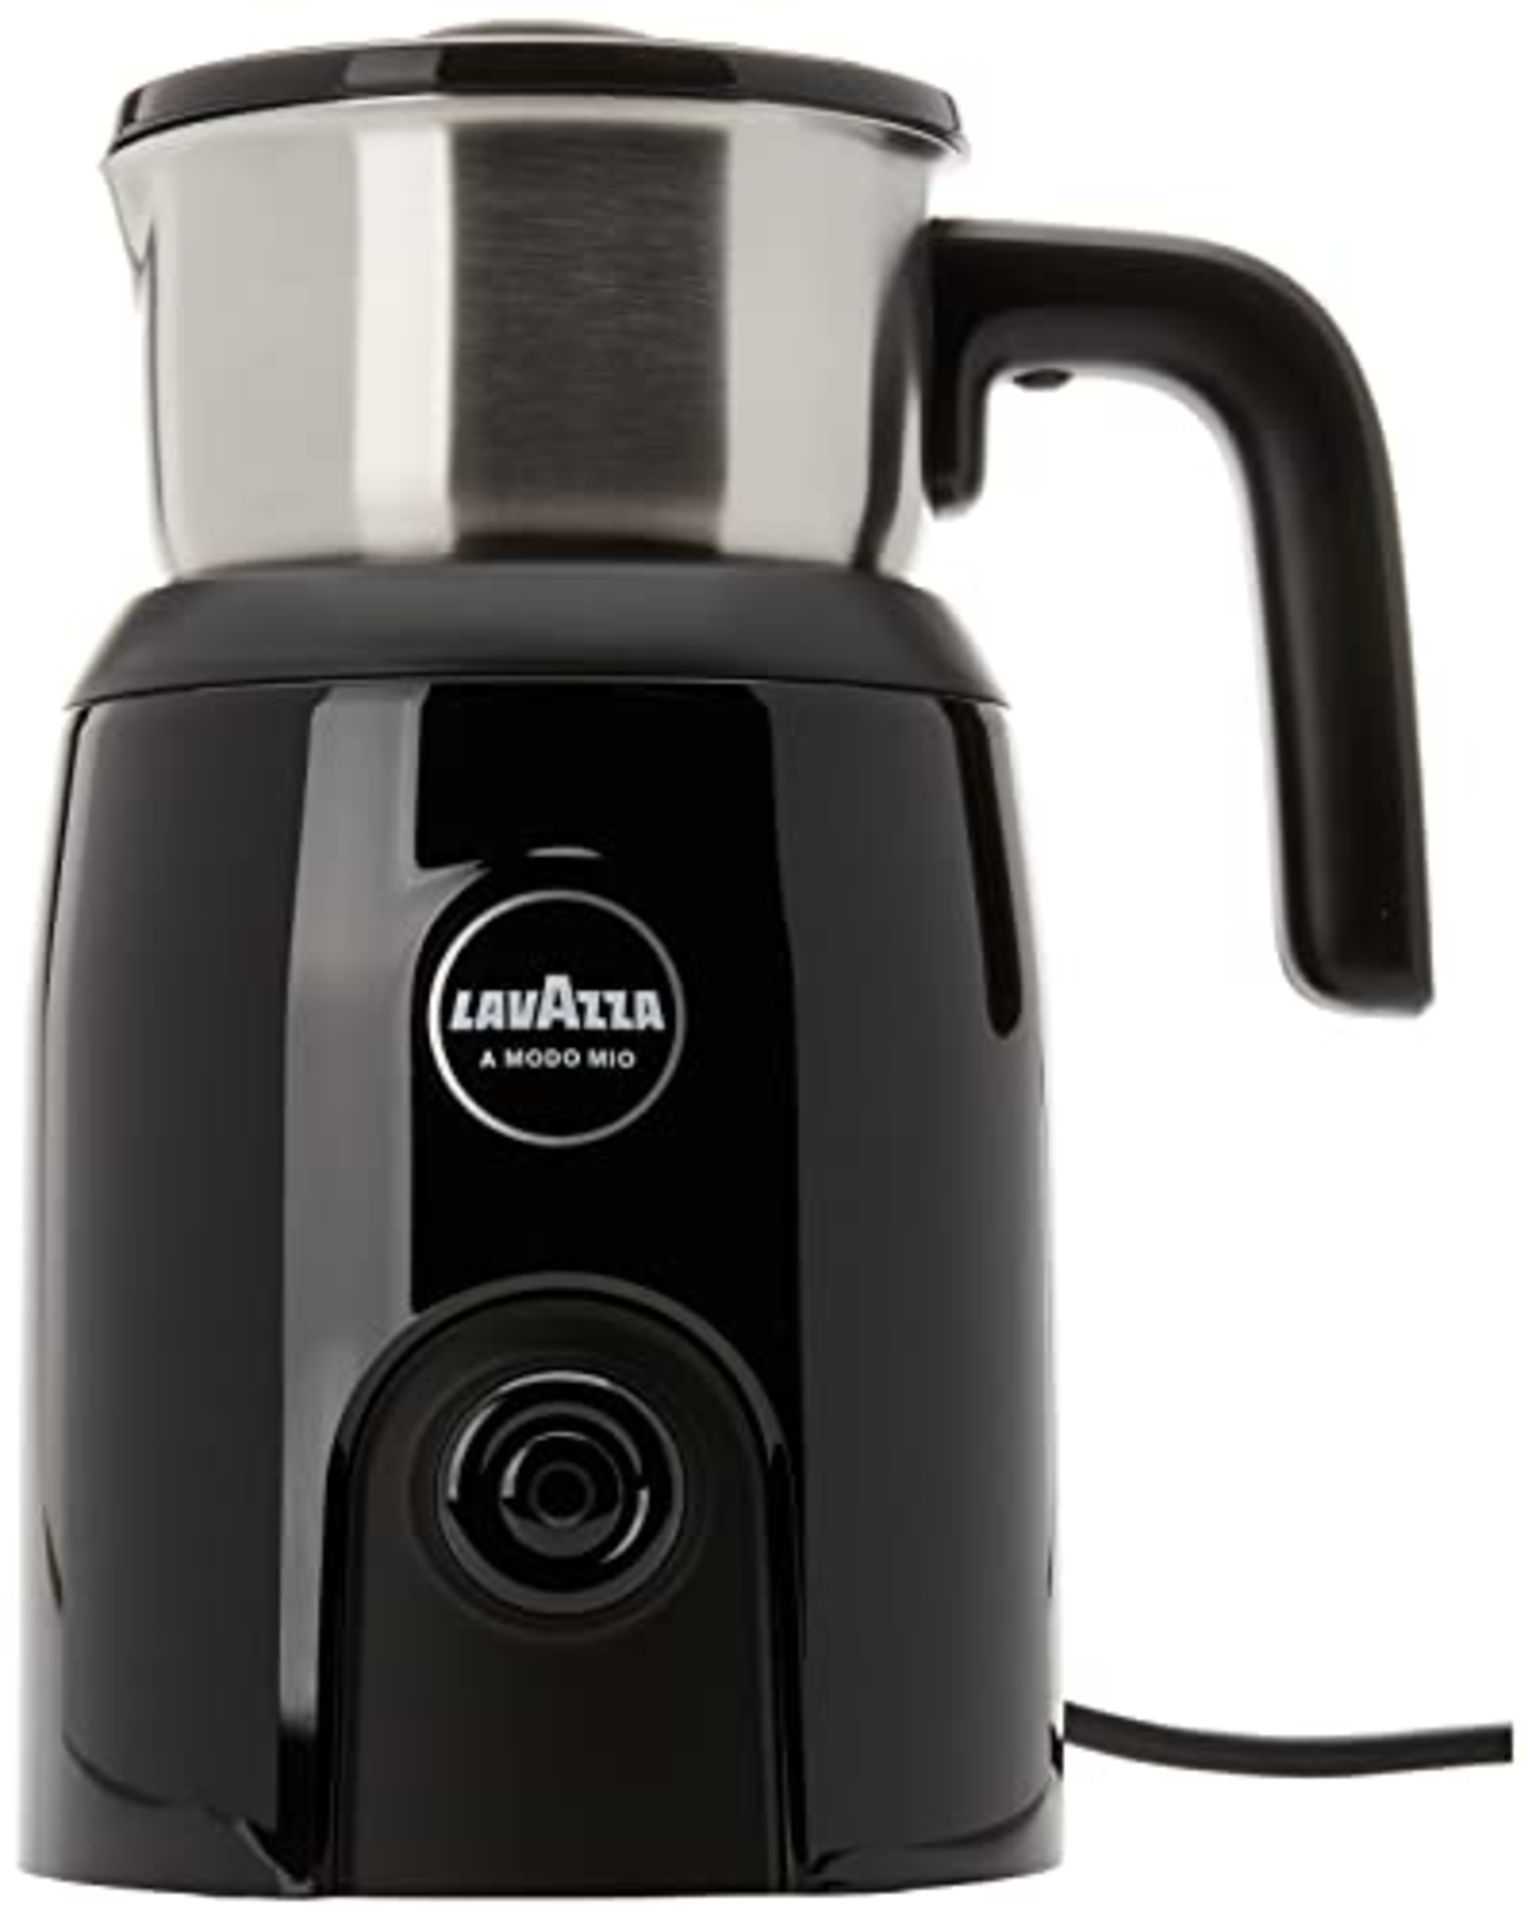 RRP £58.00 Lavazza, A Modo Mio MilkUp Frother, Electric Milk Frother, Ideal for Cappuccino, Hot C